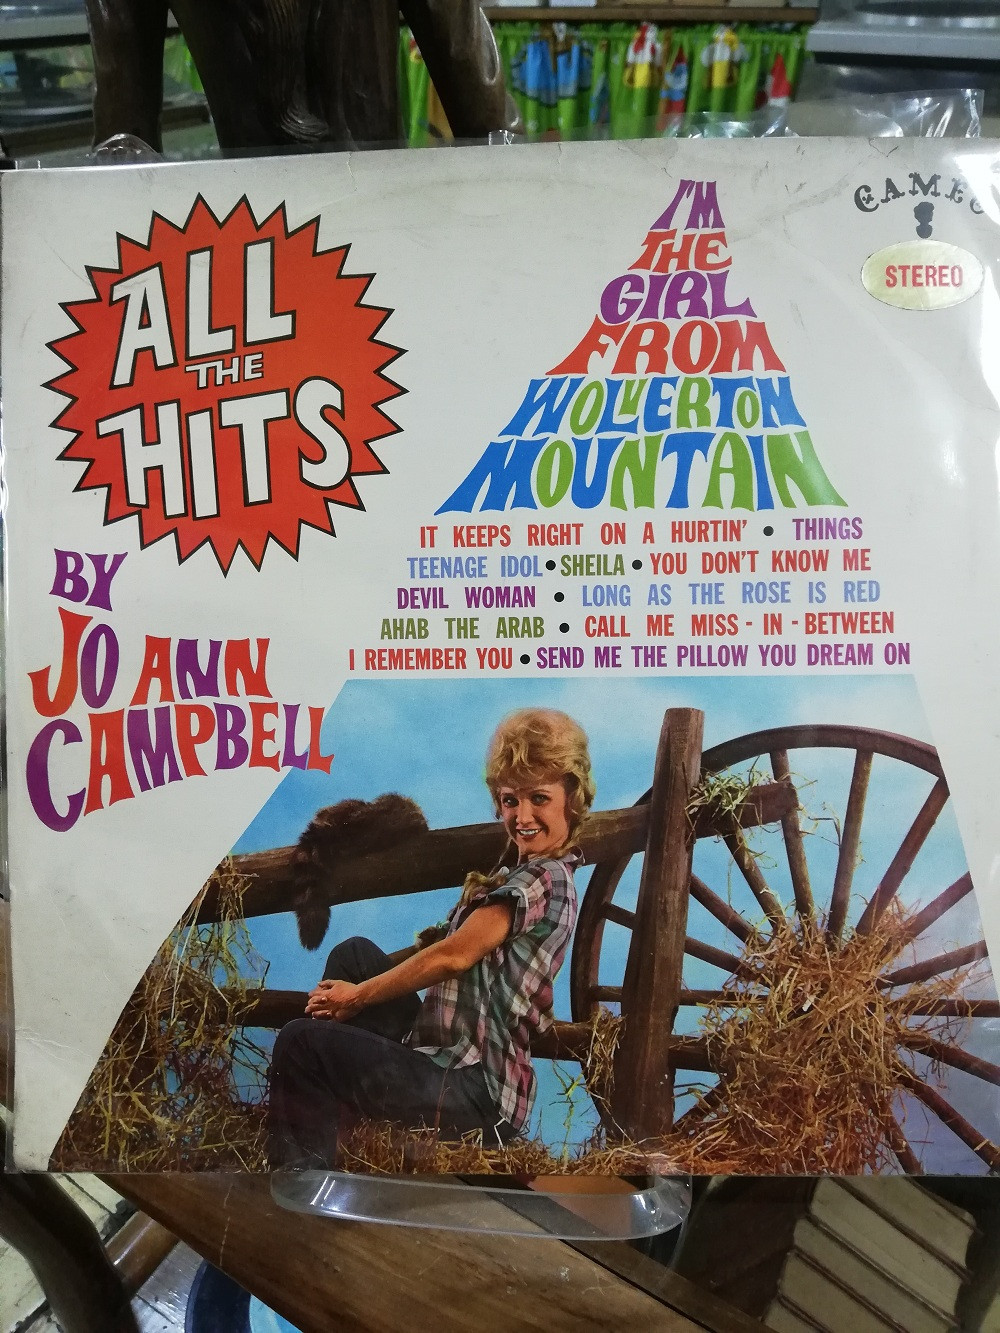 Imagen LP JO ANN CAMPBELL - I´M THE GIRL FROM WOLVERTON MOUNTAIN - ALL THE HITS